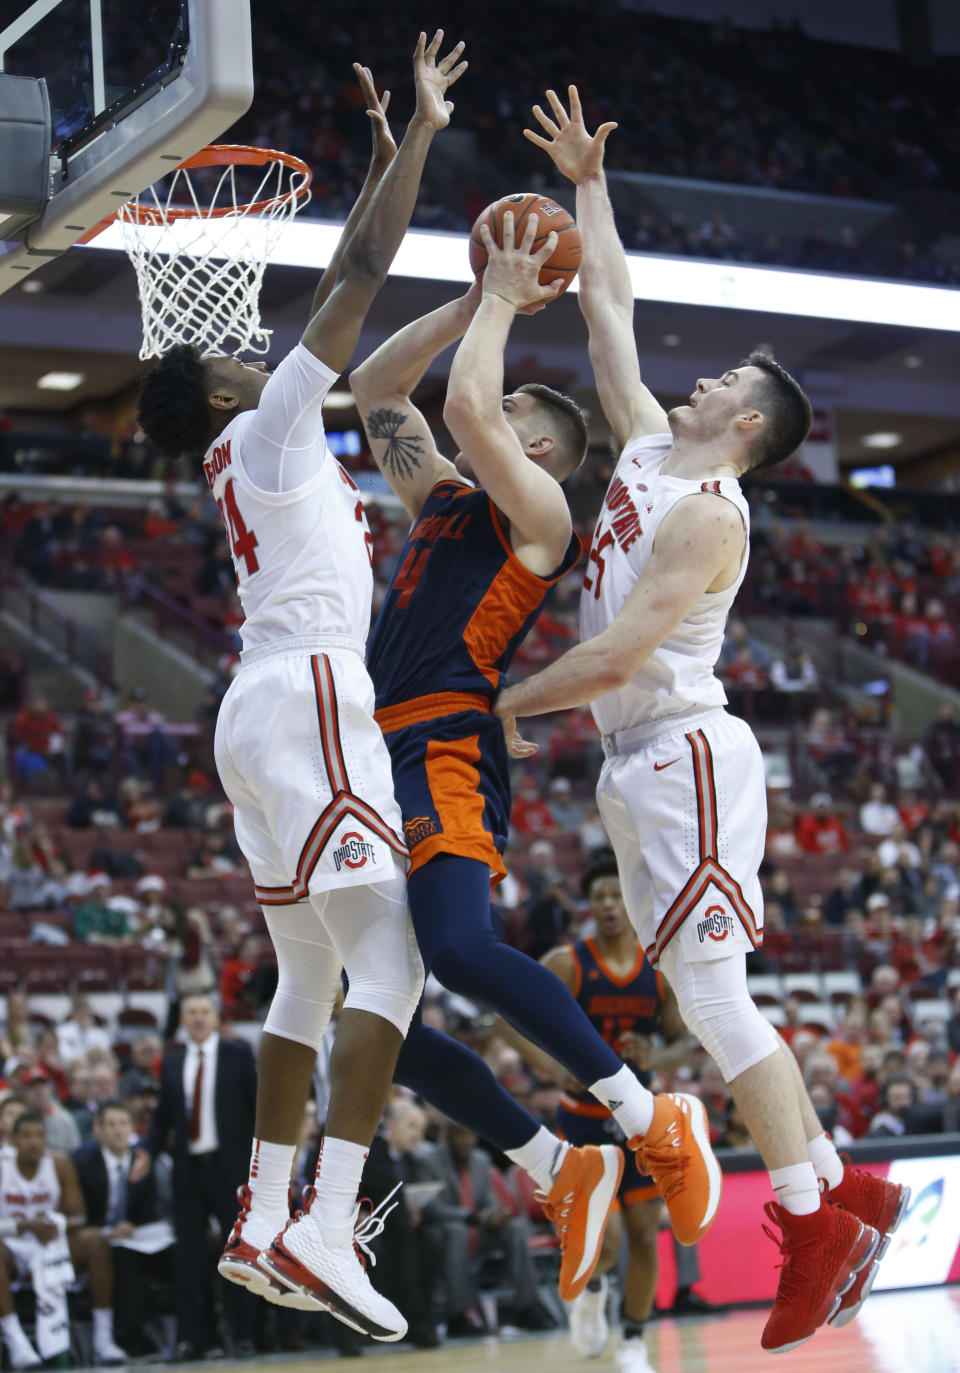 Bucknell's Nate Sestina, center, shoots between Ohio State's Andre Wesson, left, and Kyle Young,right, during the first half of an NCAA college basketball game Saturday, Dec. 15, 2018, in Columbus, Ohio. (AP Photo/Jay LaPrete)